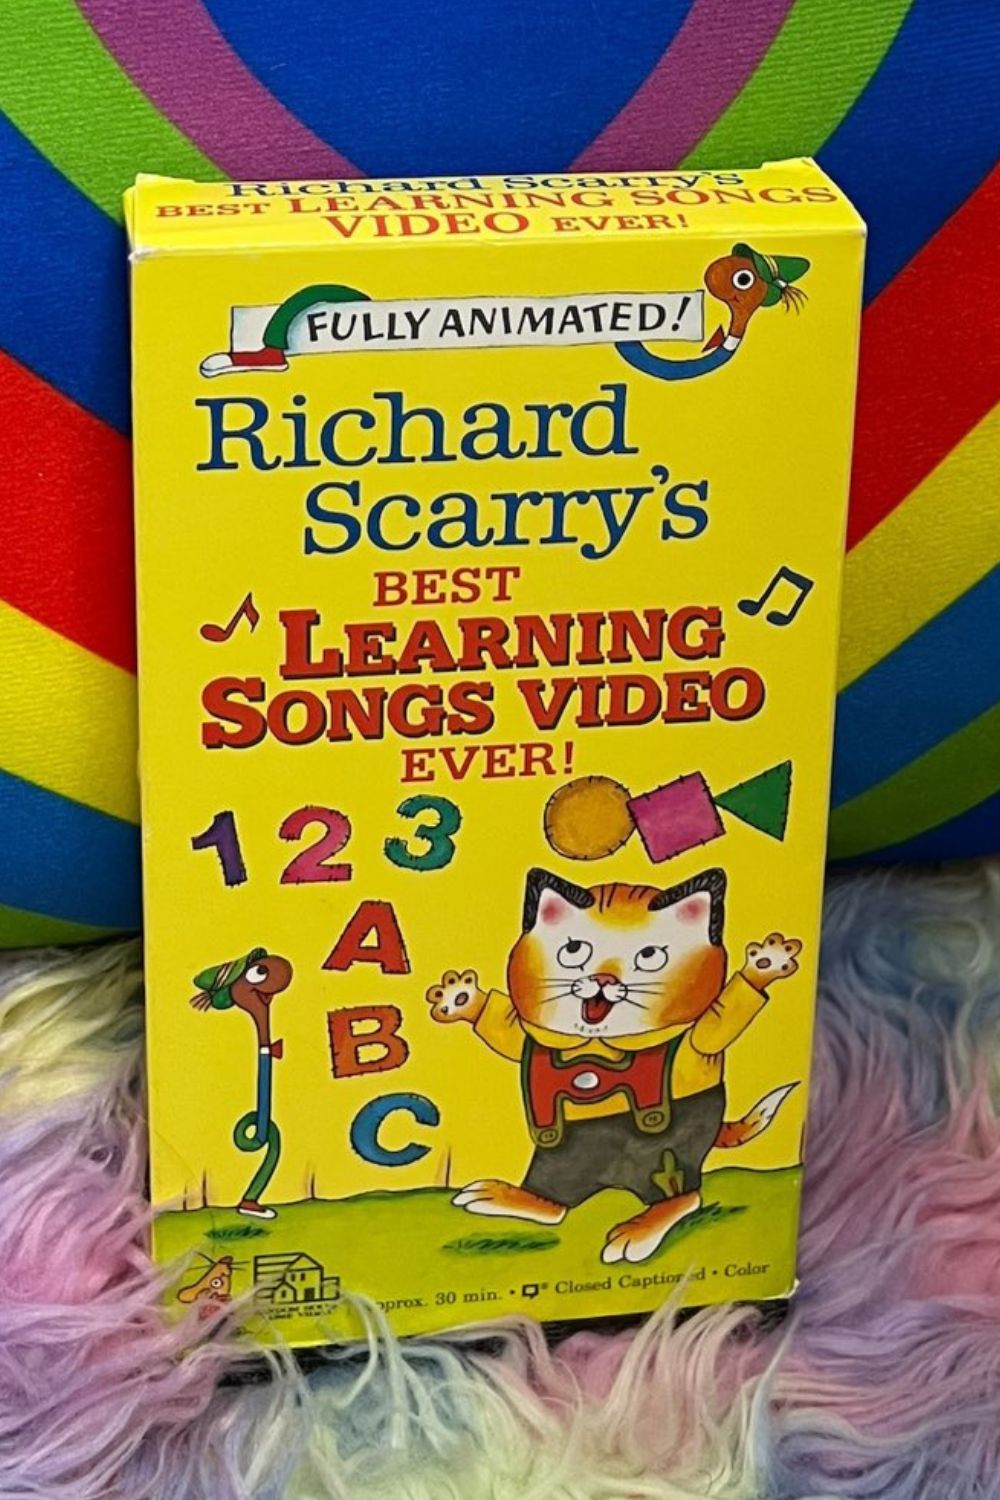 RICHARD SCARRY'S BEST LEARNING SONG VHS*